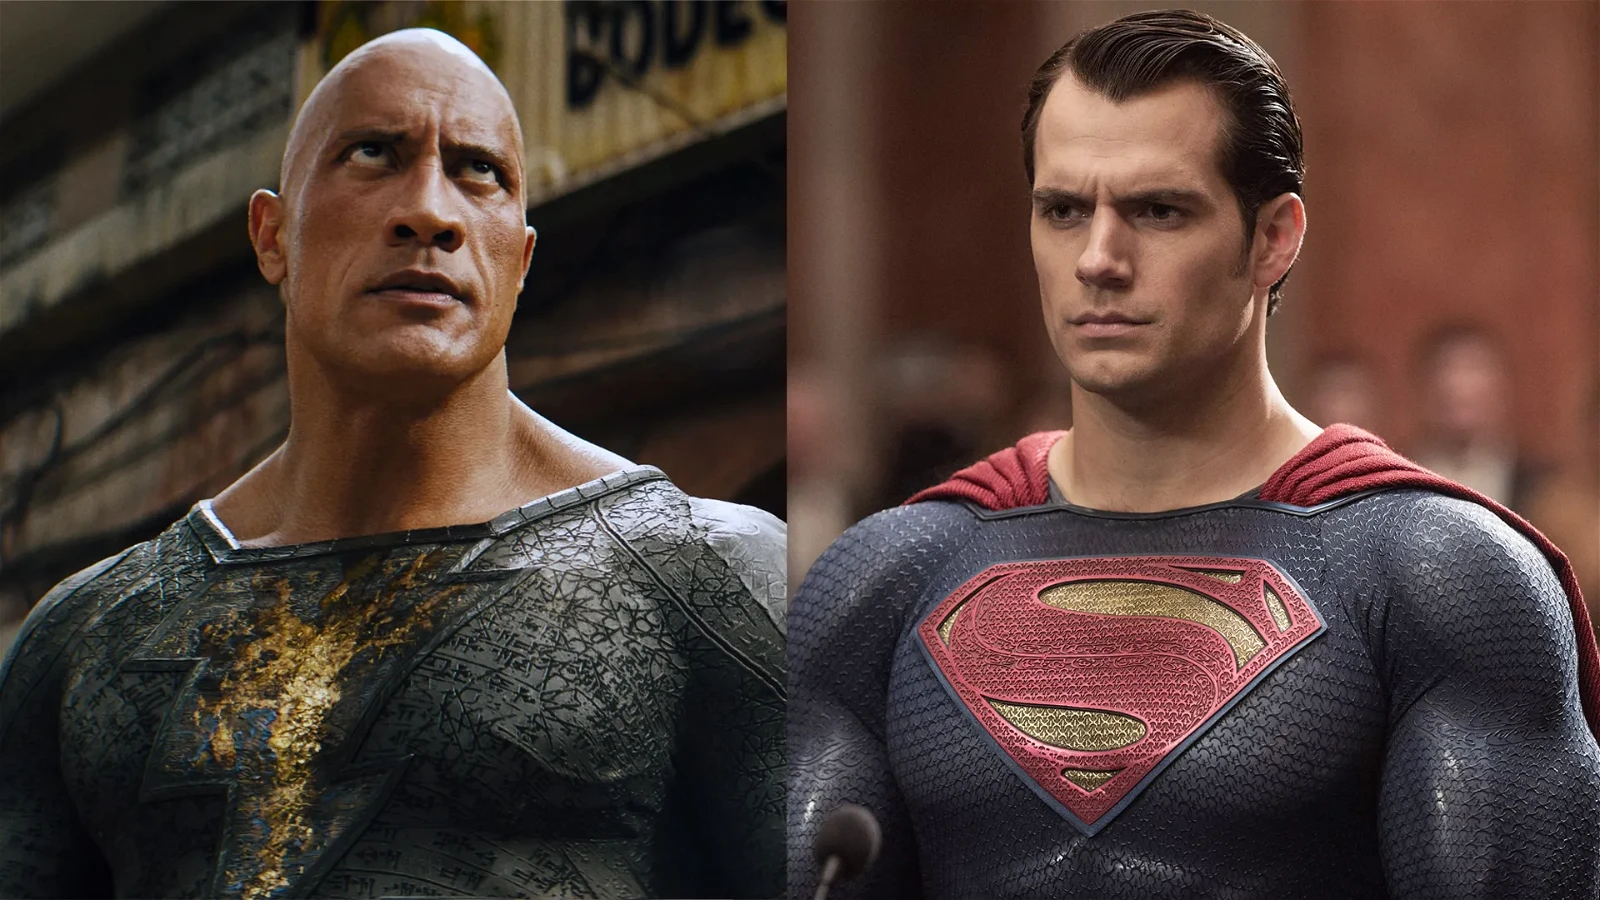 The earlier WB regime did not want Henry Cavill's Black Adam cameo